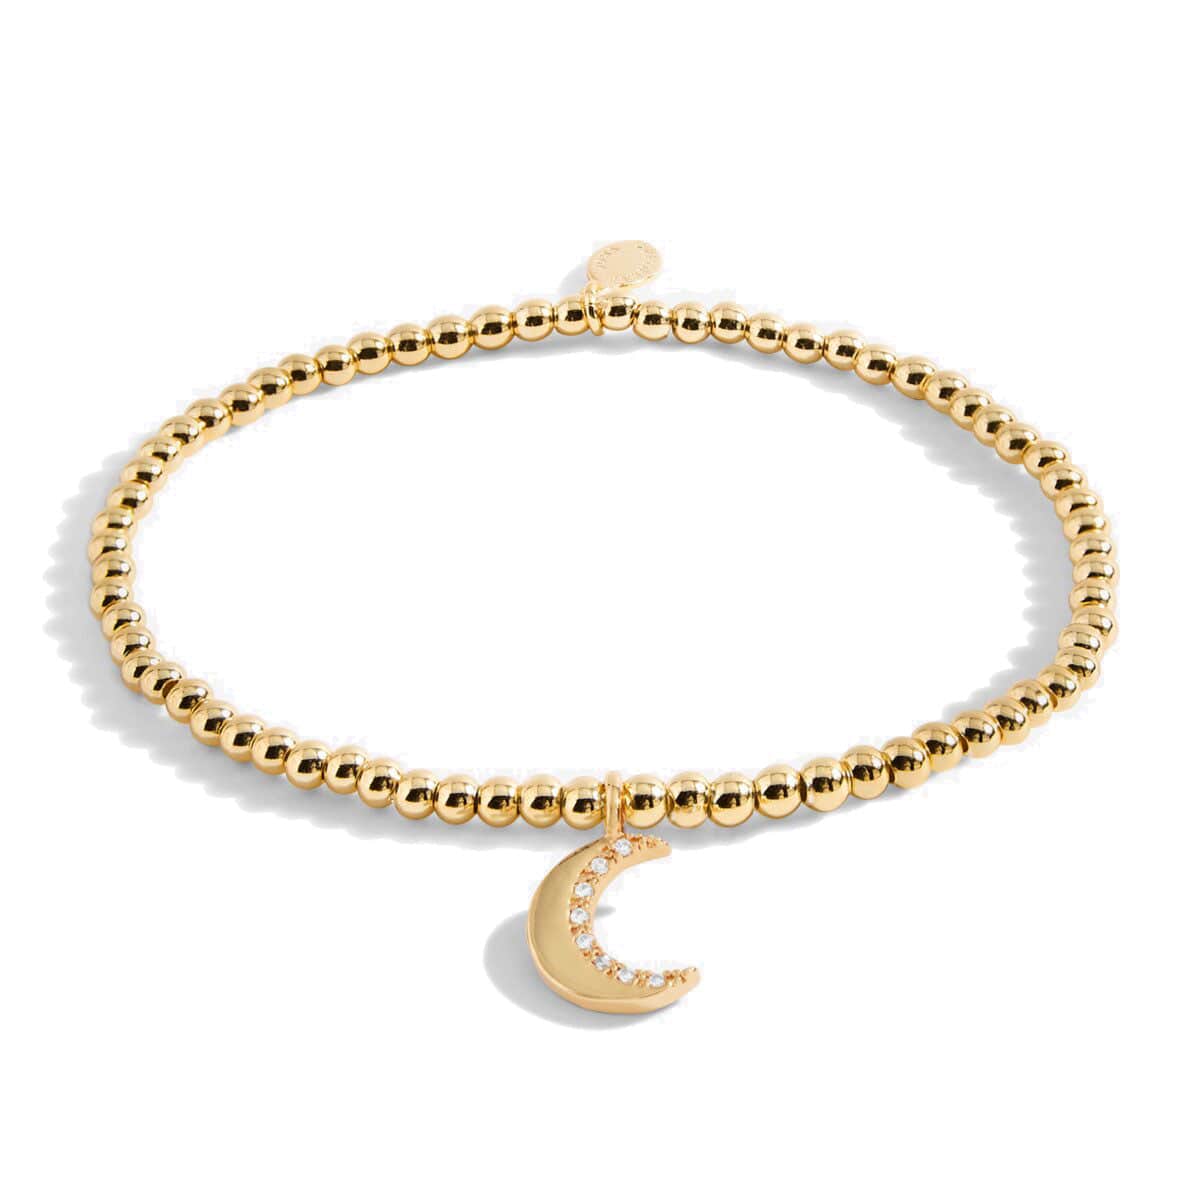 Joma Jewellery Bracelet Joma Jewellery Bracelet - A Little Gold Love You To The Moon And Back